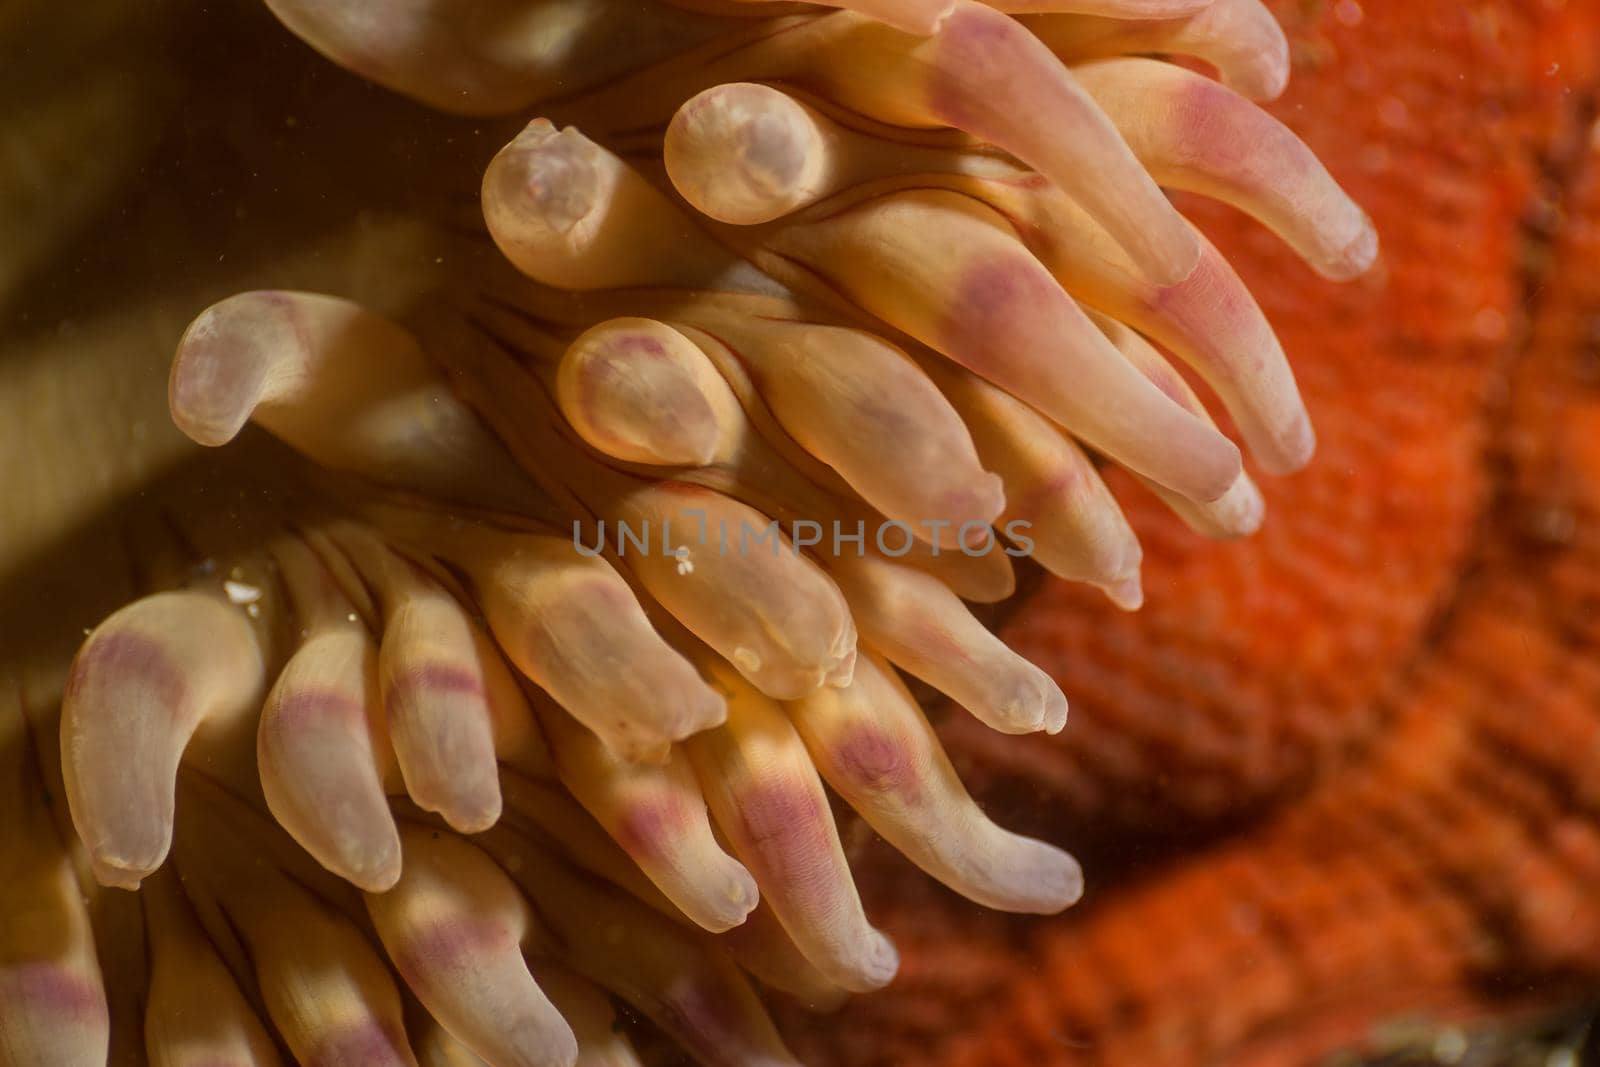 Macro Picture of a Swimming Anemone in Pacific Northwest Ocean by edb3_16